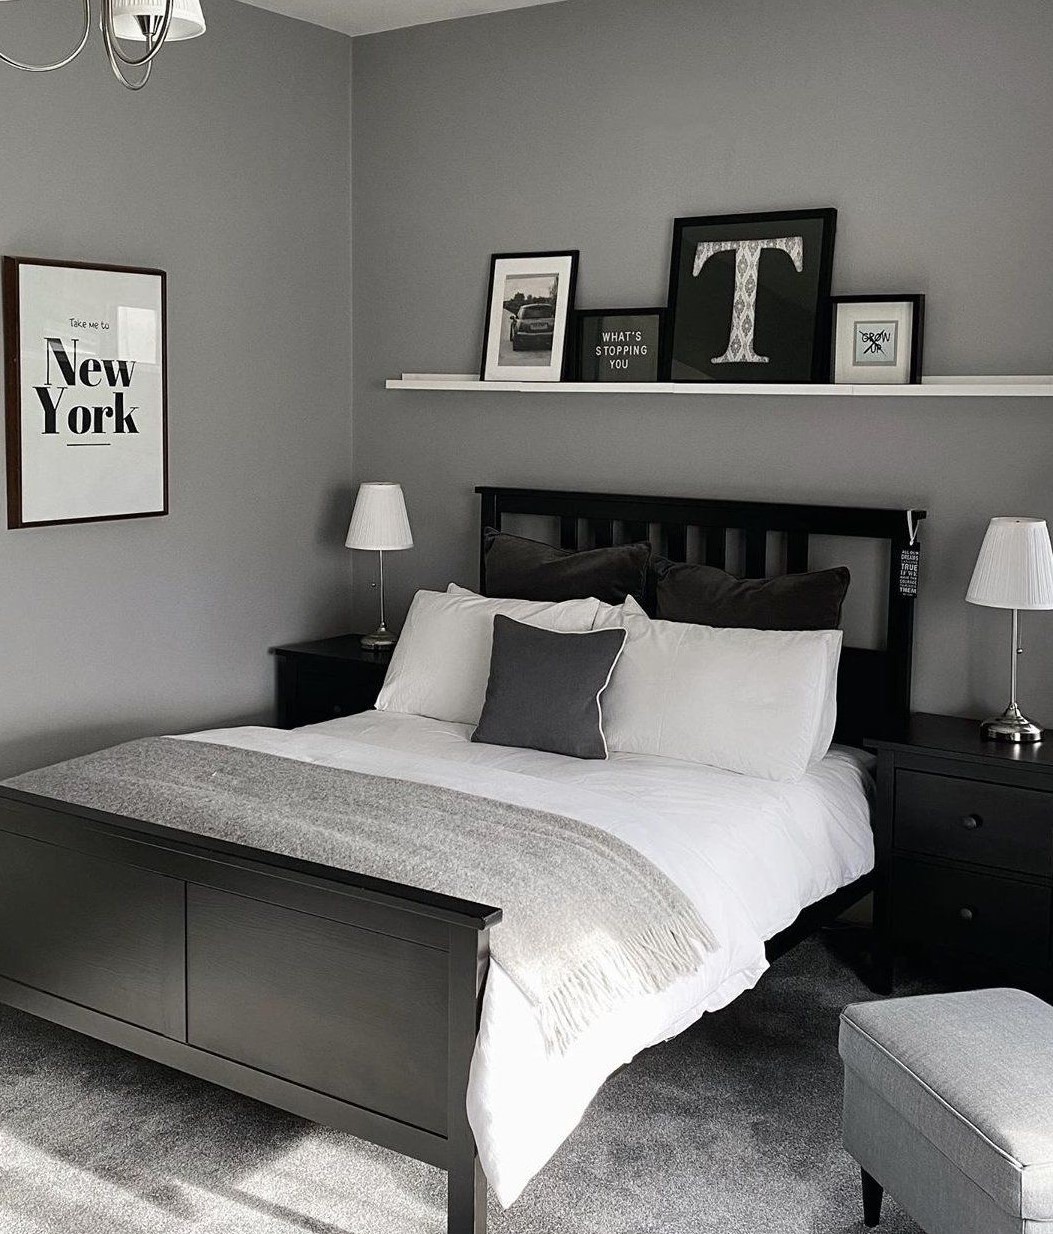 Monochrome Theme With Gray Wall